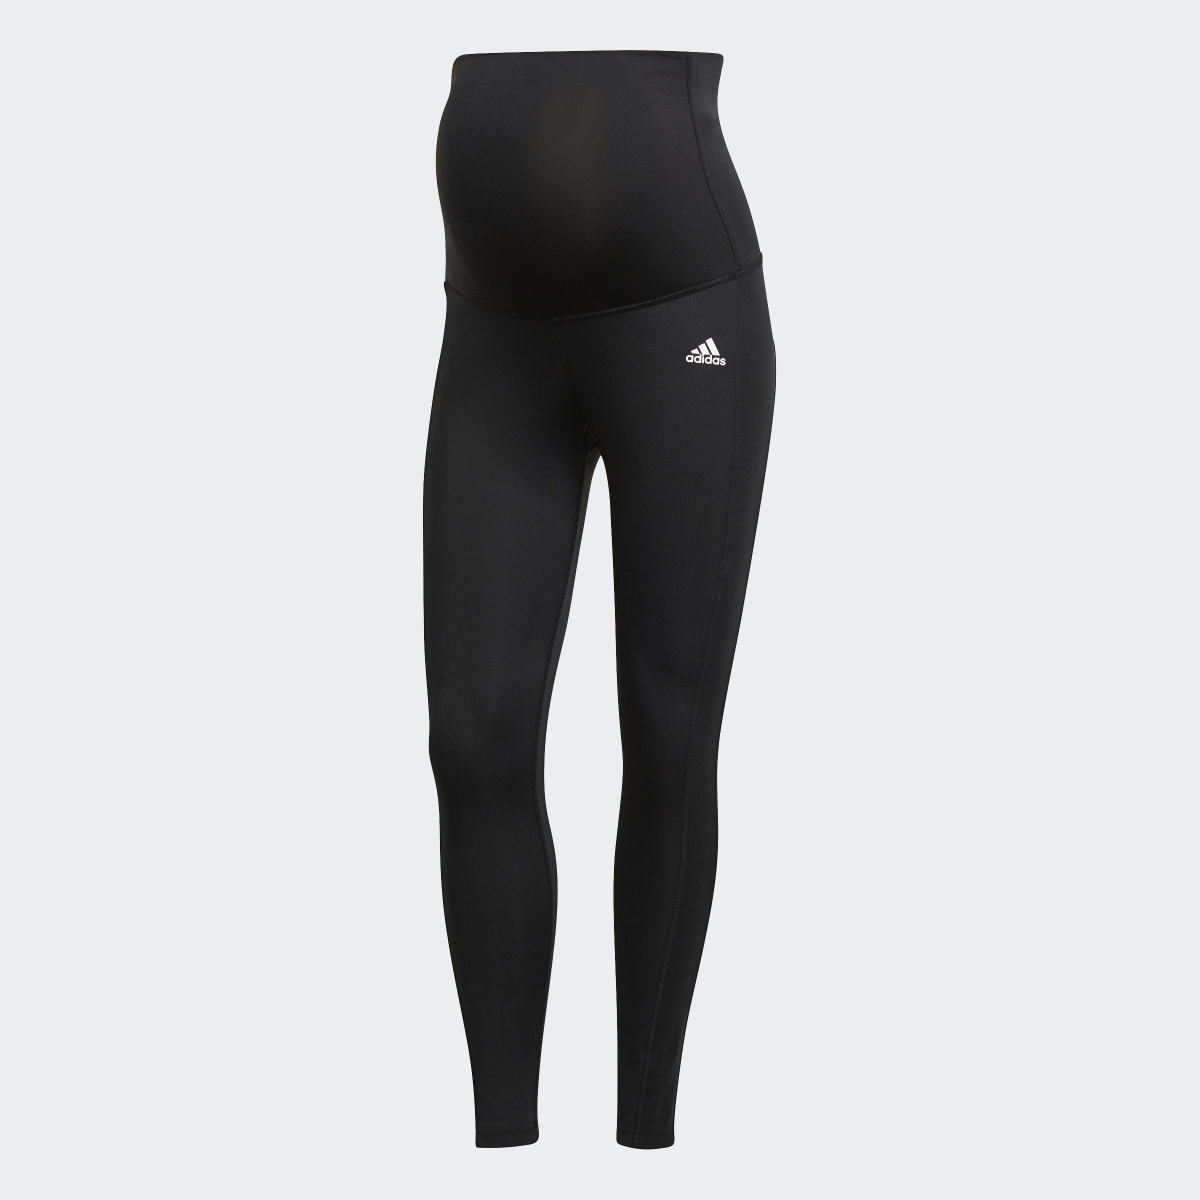 Adidas Designed to Move 7/8 Sport Tights (Maternity). 6